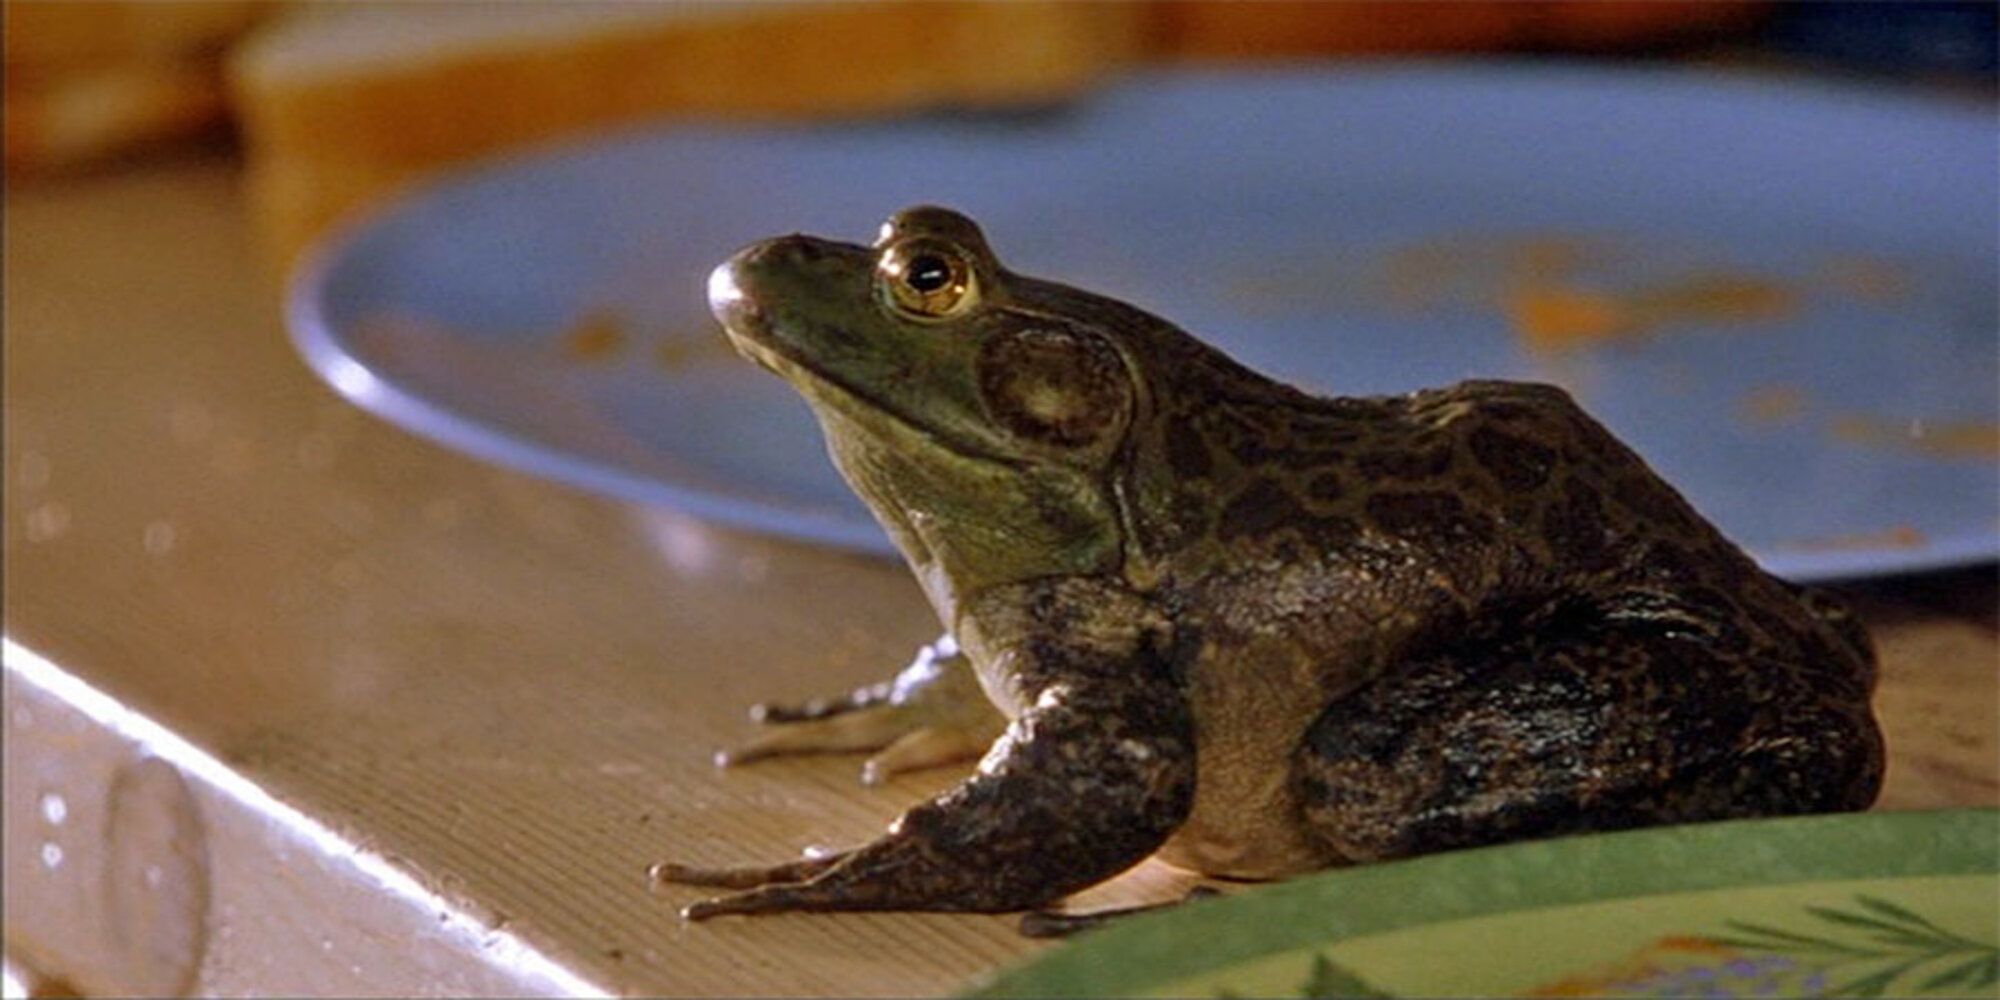 Beanz the Frog in Cheaper By The Dozen Sat on the Kitchen Countertop